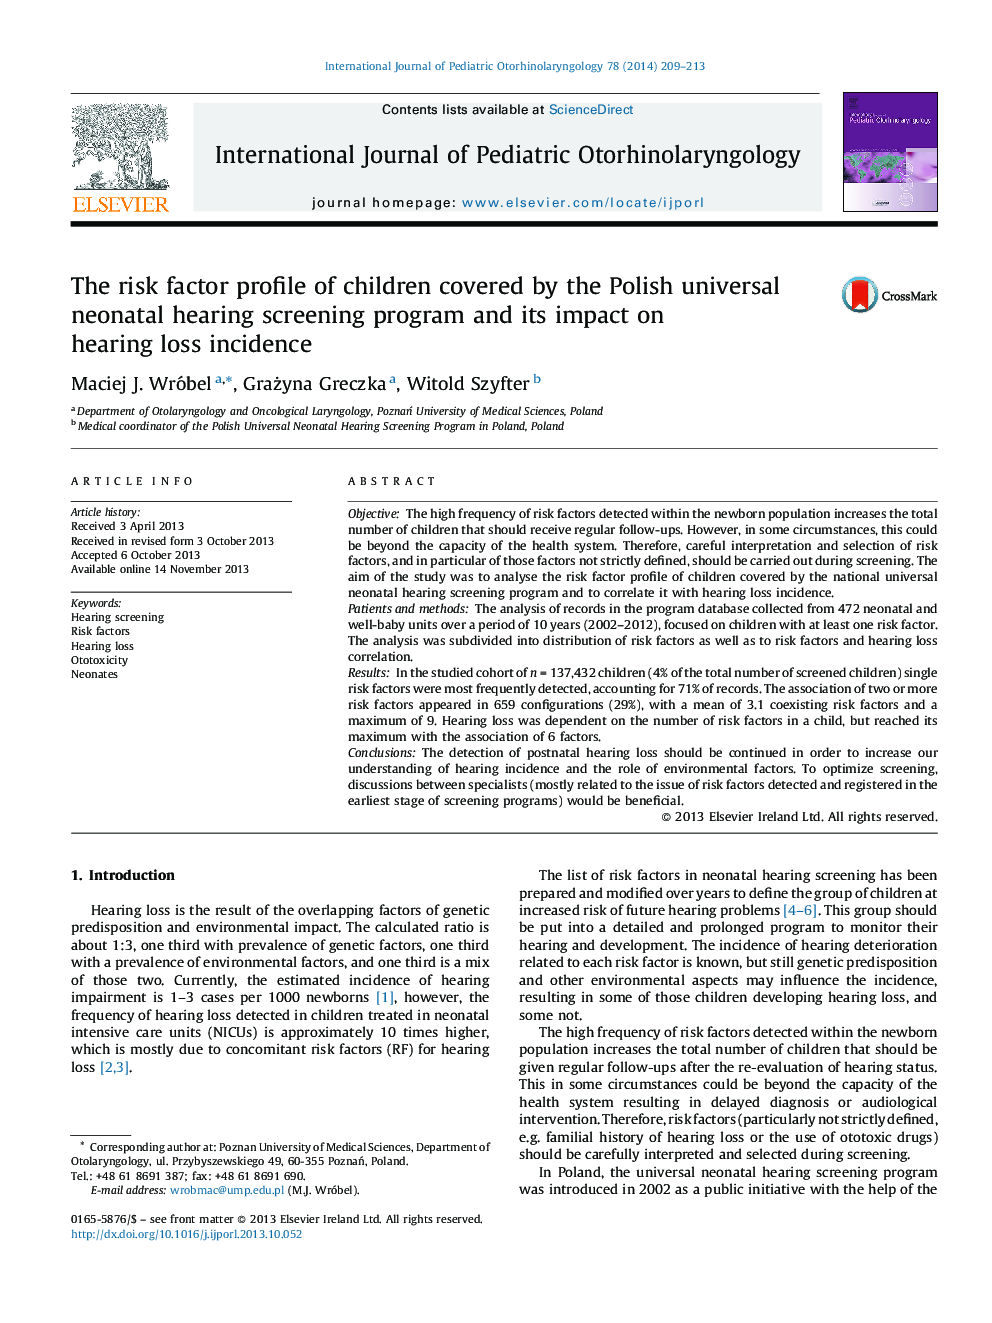 The risk factor profile of children covered by the Polish universal neonatal hearing screening program and its impact on hearing loss incidence